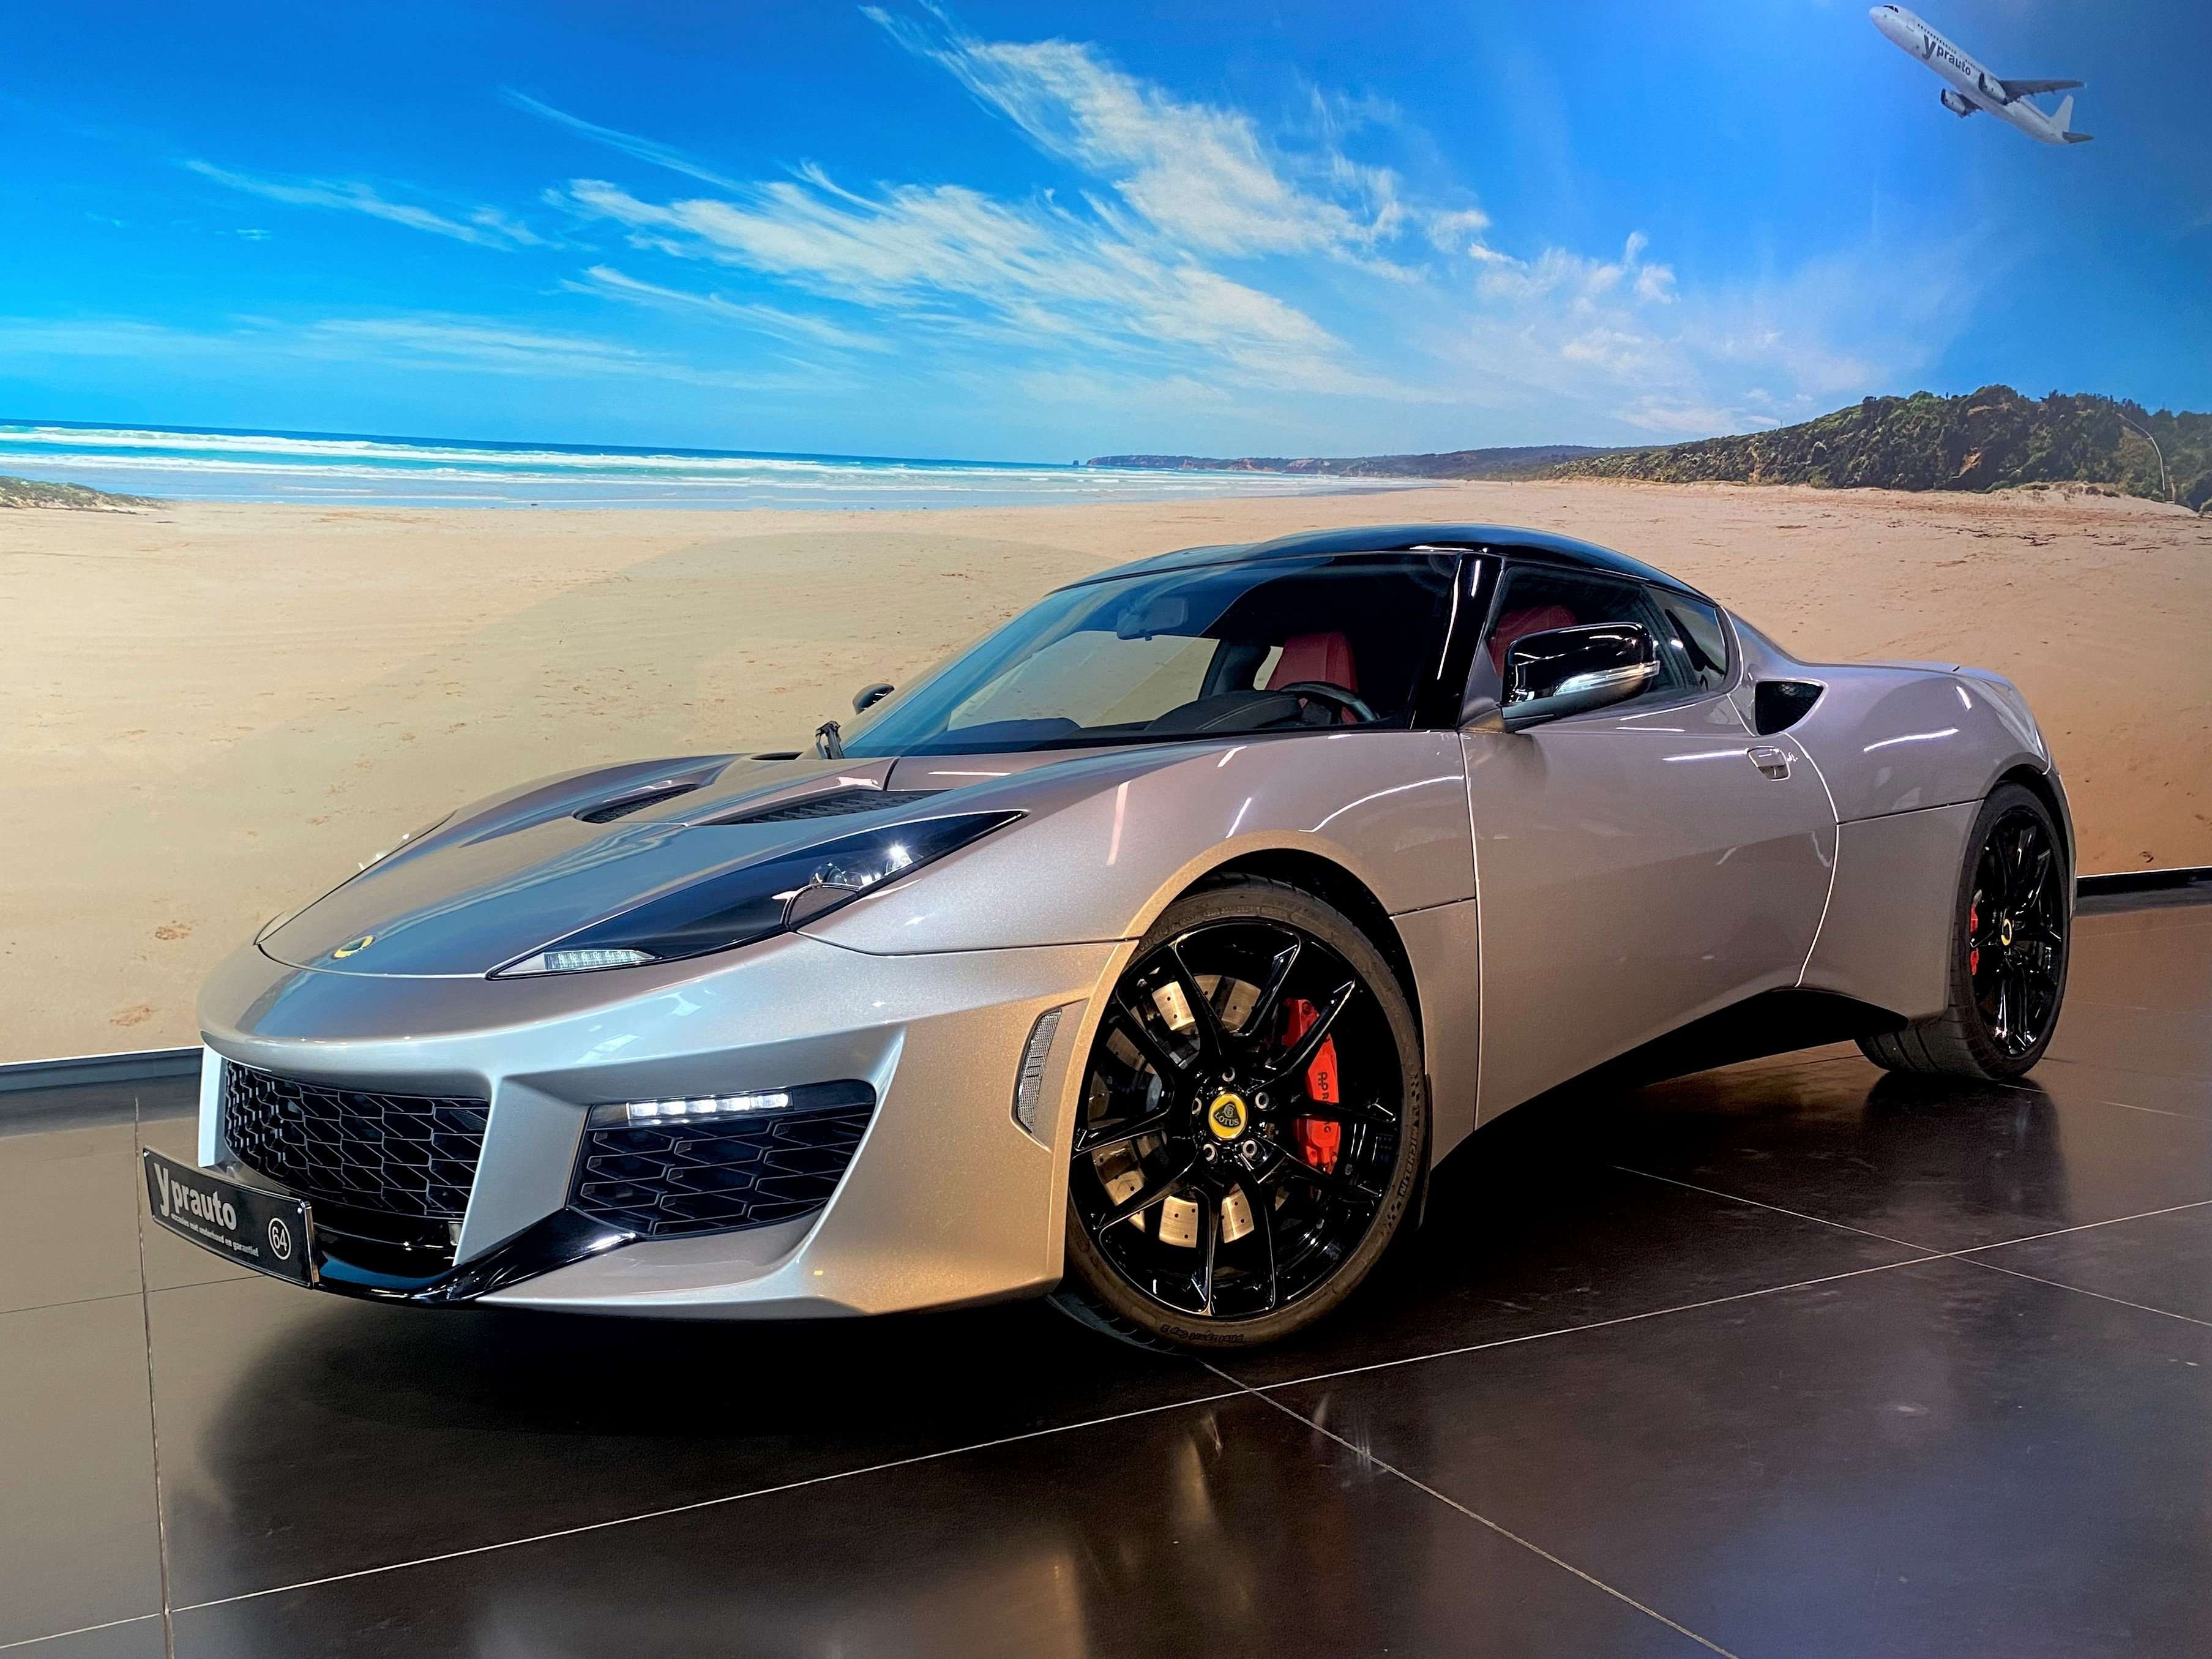 Lotus Evora Coupe in Silver used in Oostnieuwkerke for € 78,500.-